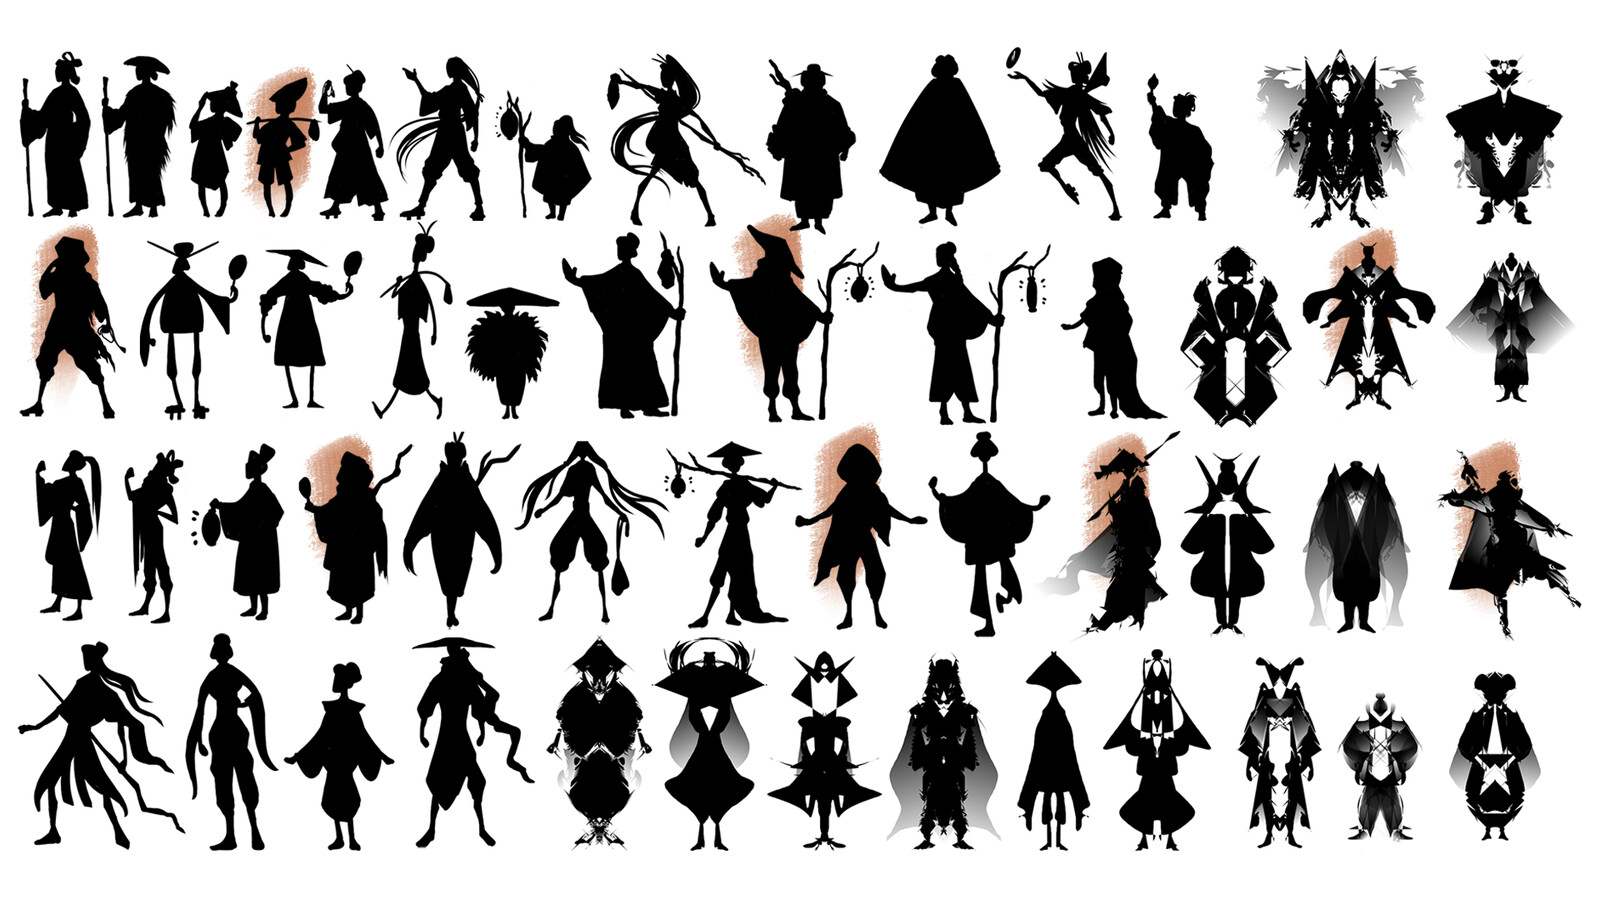 Mercy silhouettes